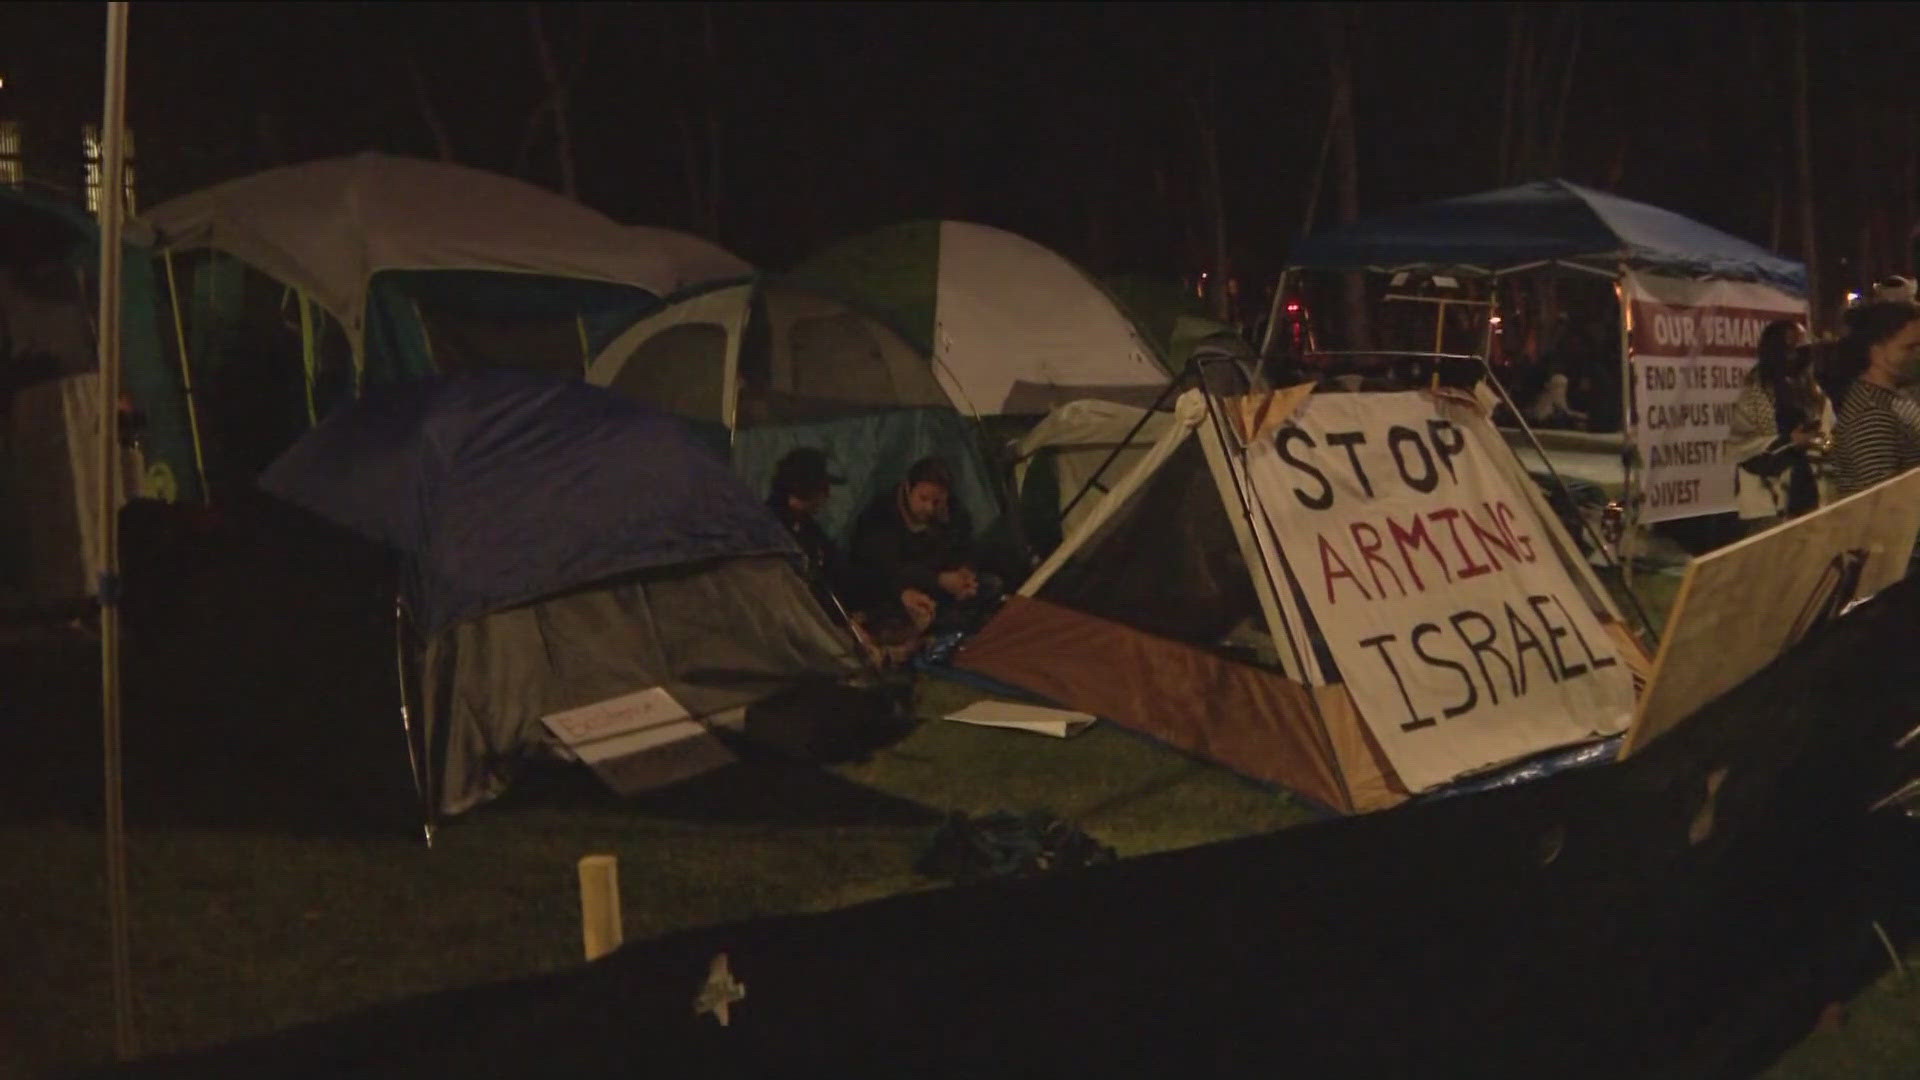 UCSD's Chancellor said in a statement that the tents were a 'violation of campus policy, which prohibits unauthorized encampments.'